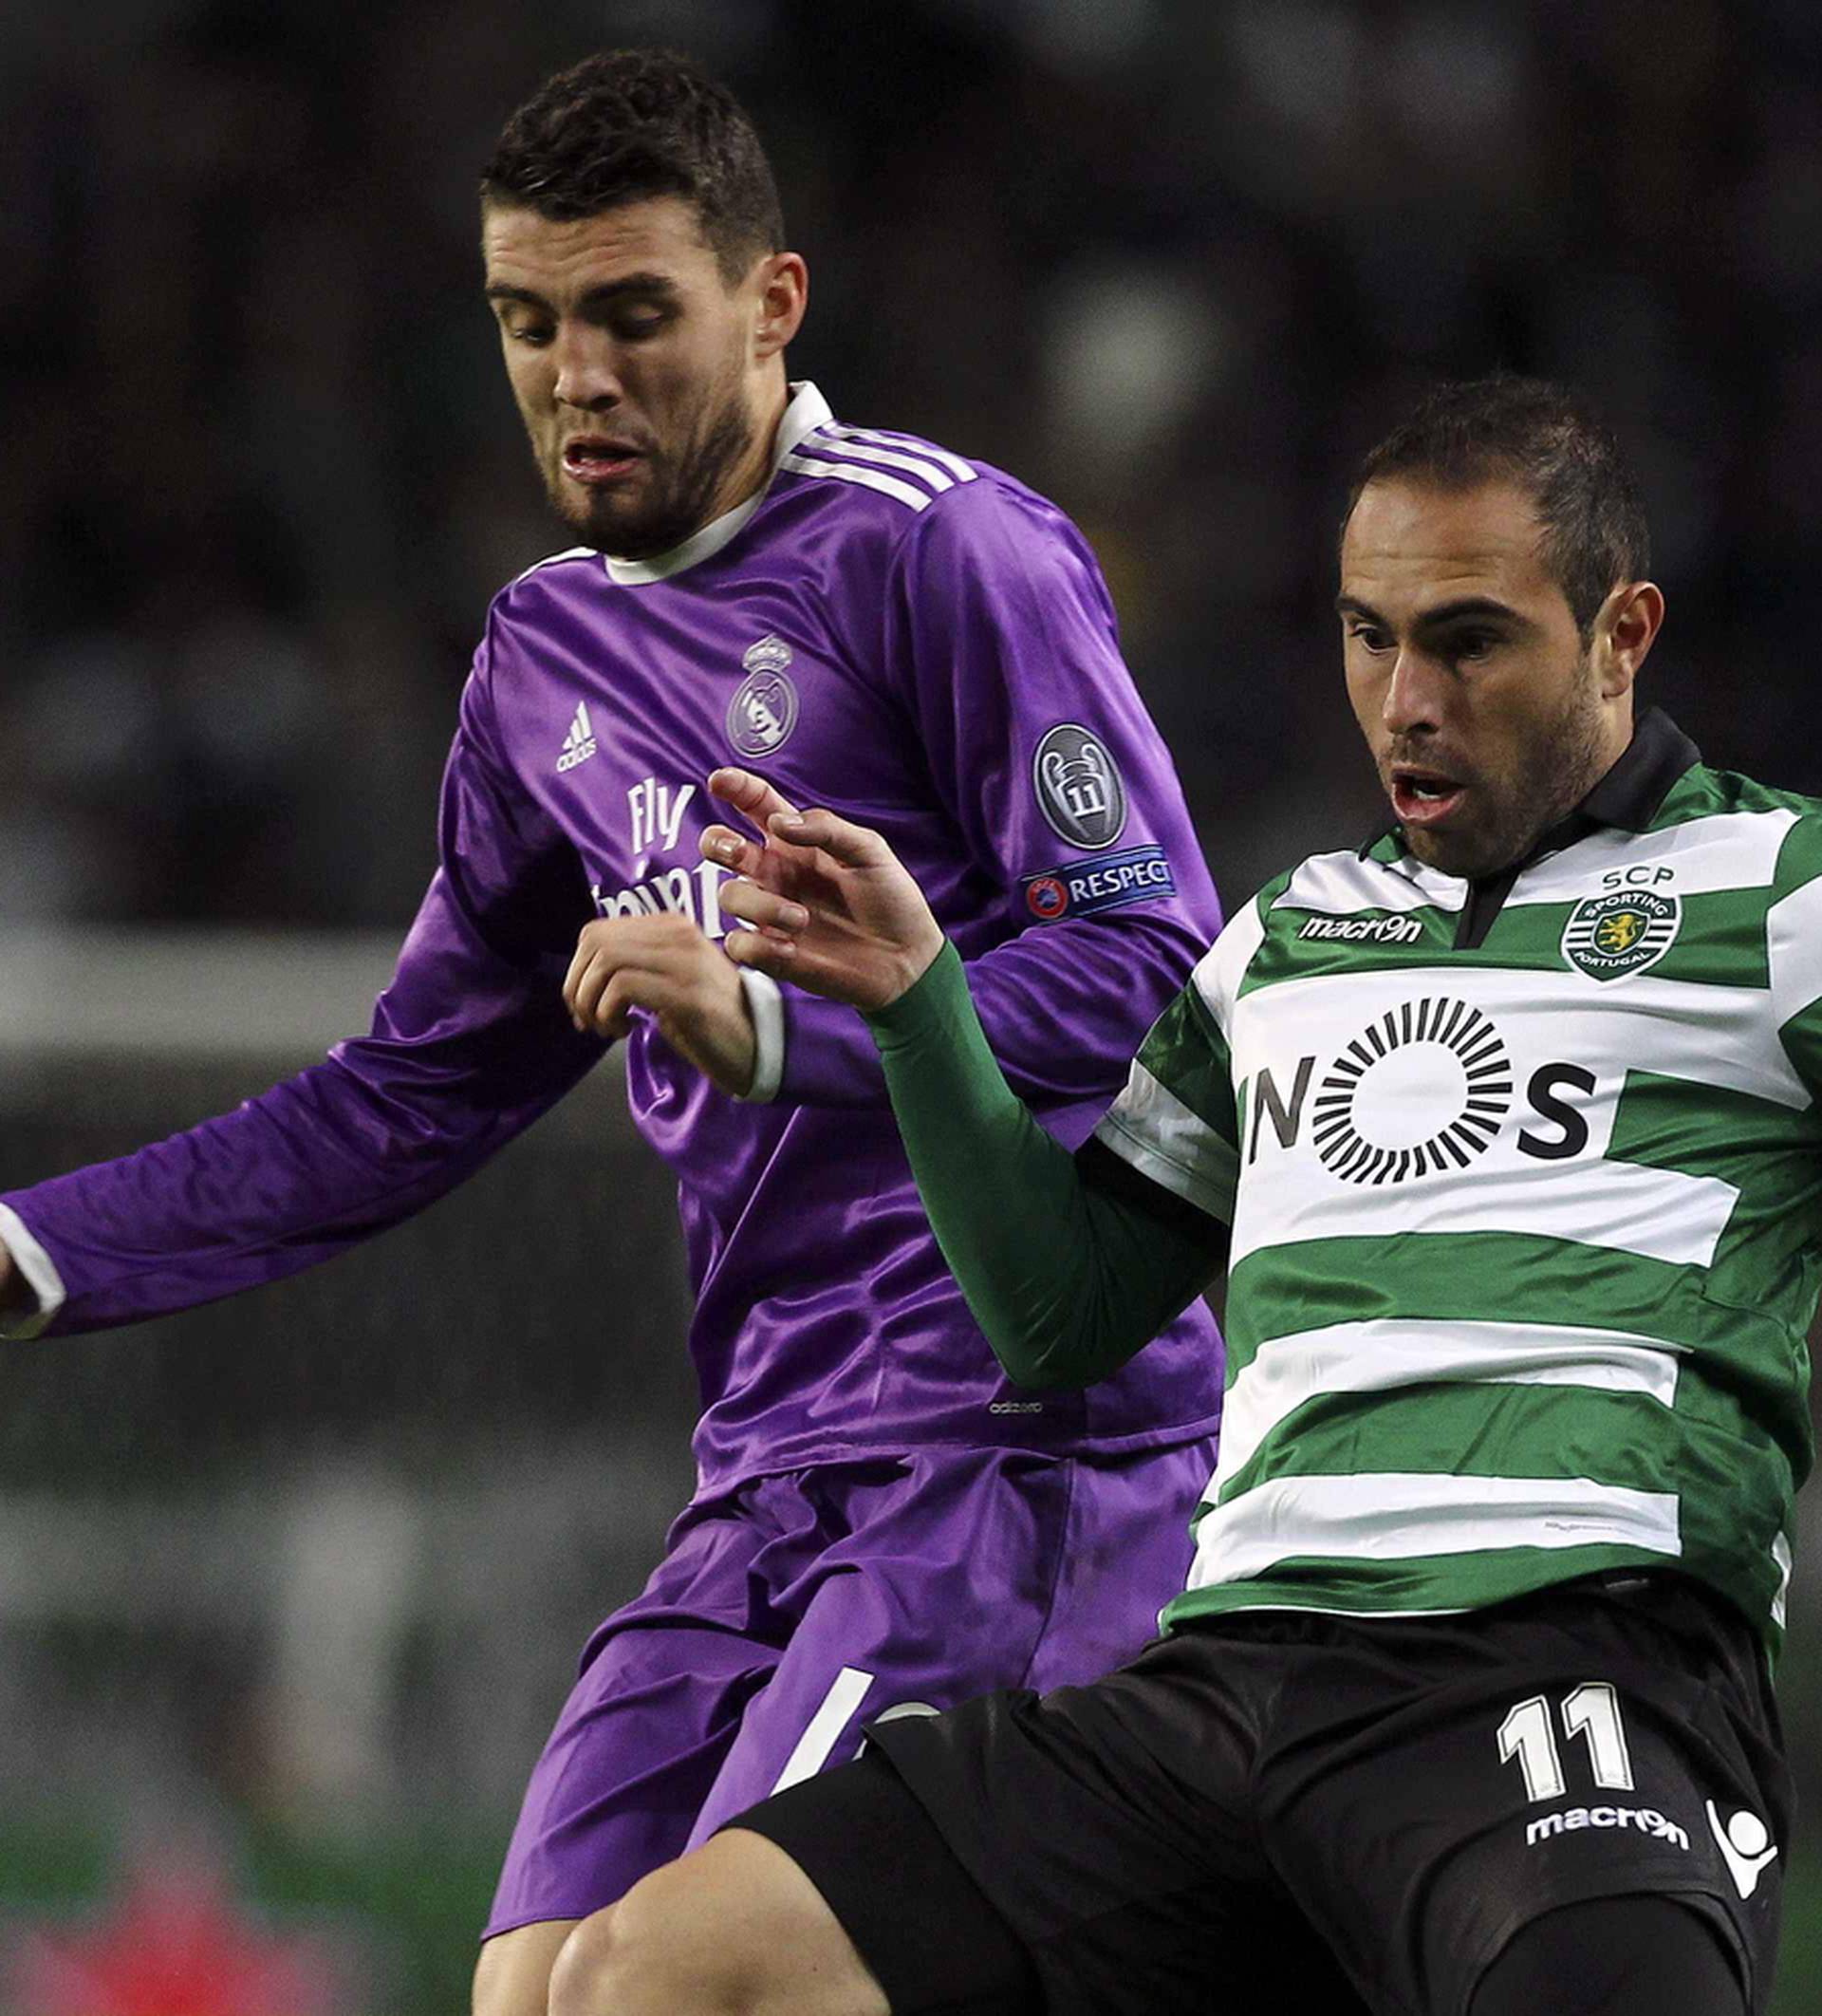 Football Soccer - Sporting v Real Madrid - UEFA Champions League group stage